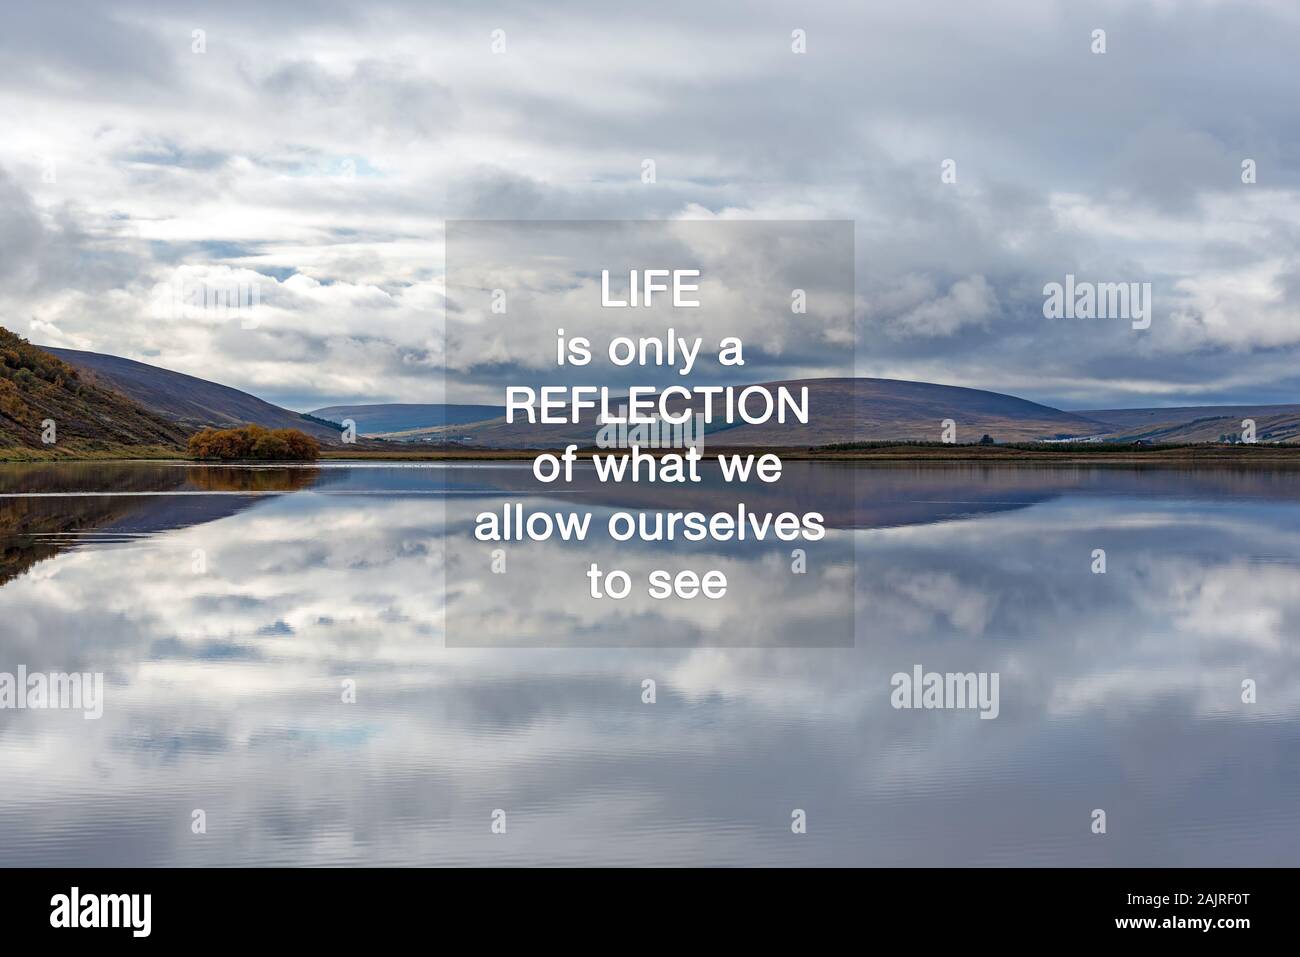 Inspirational Quotes - Life is only a reflection of what we allow ourselves to see. Stock Photo